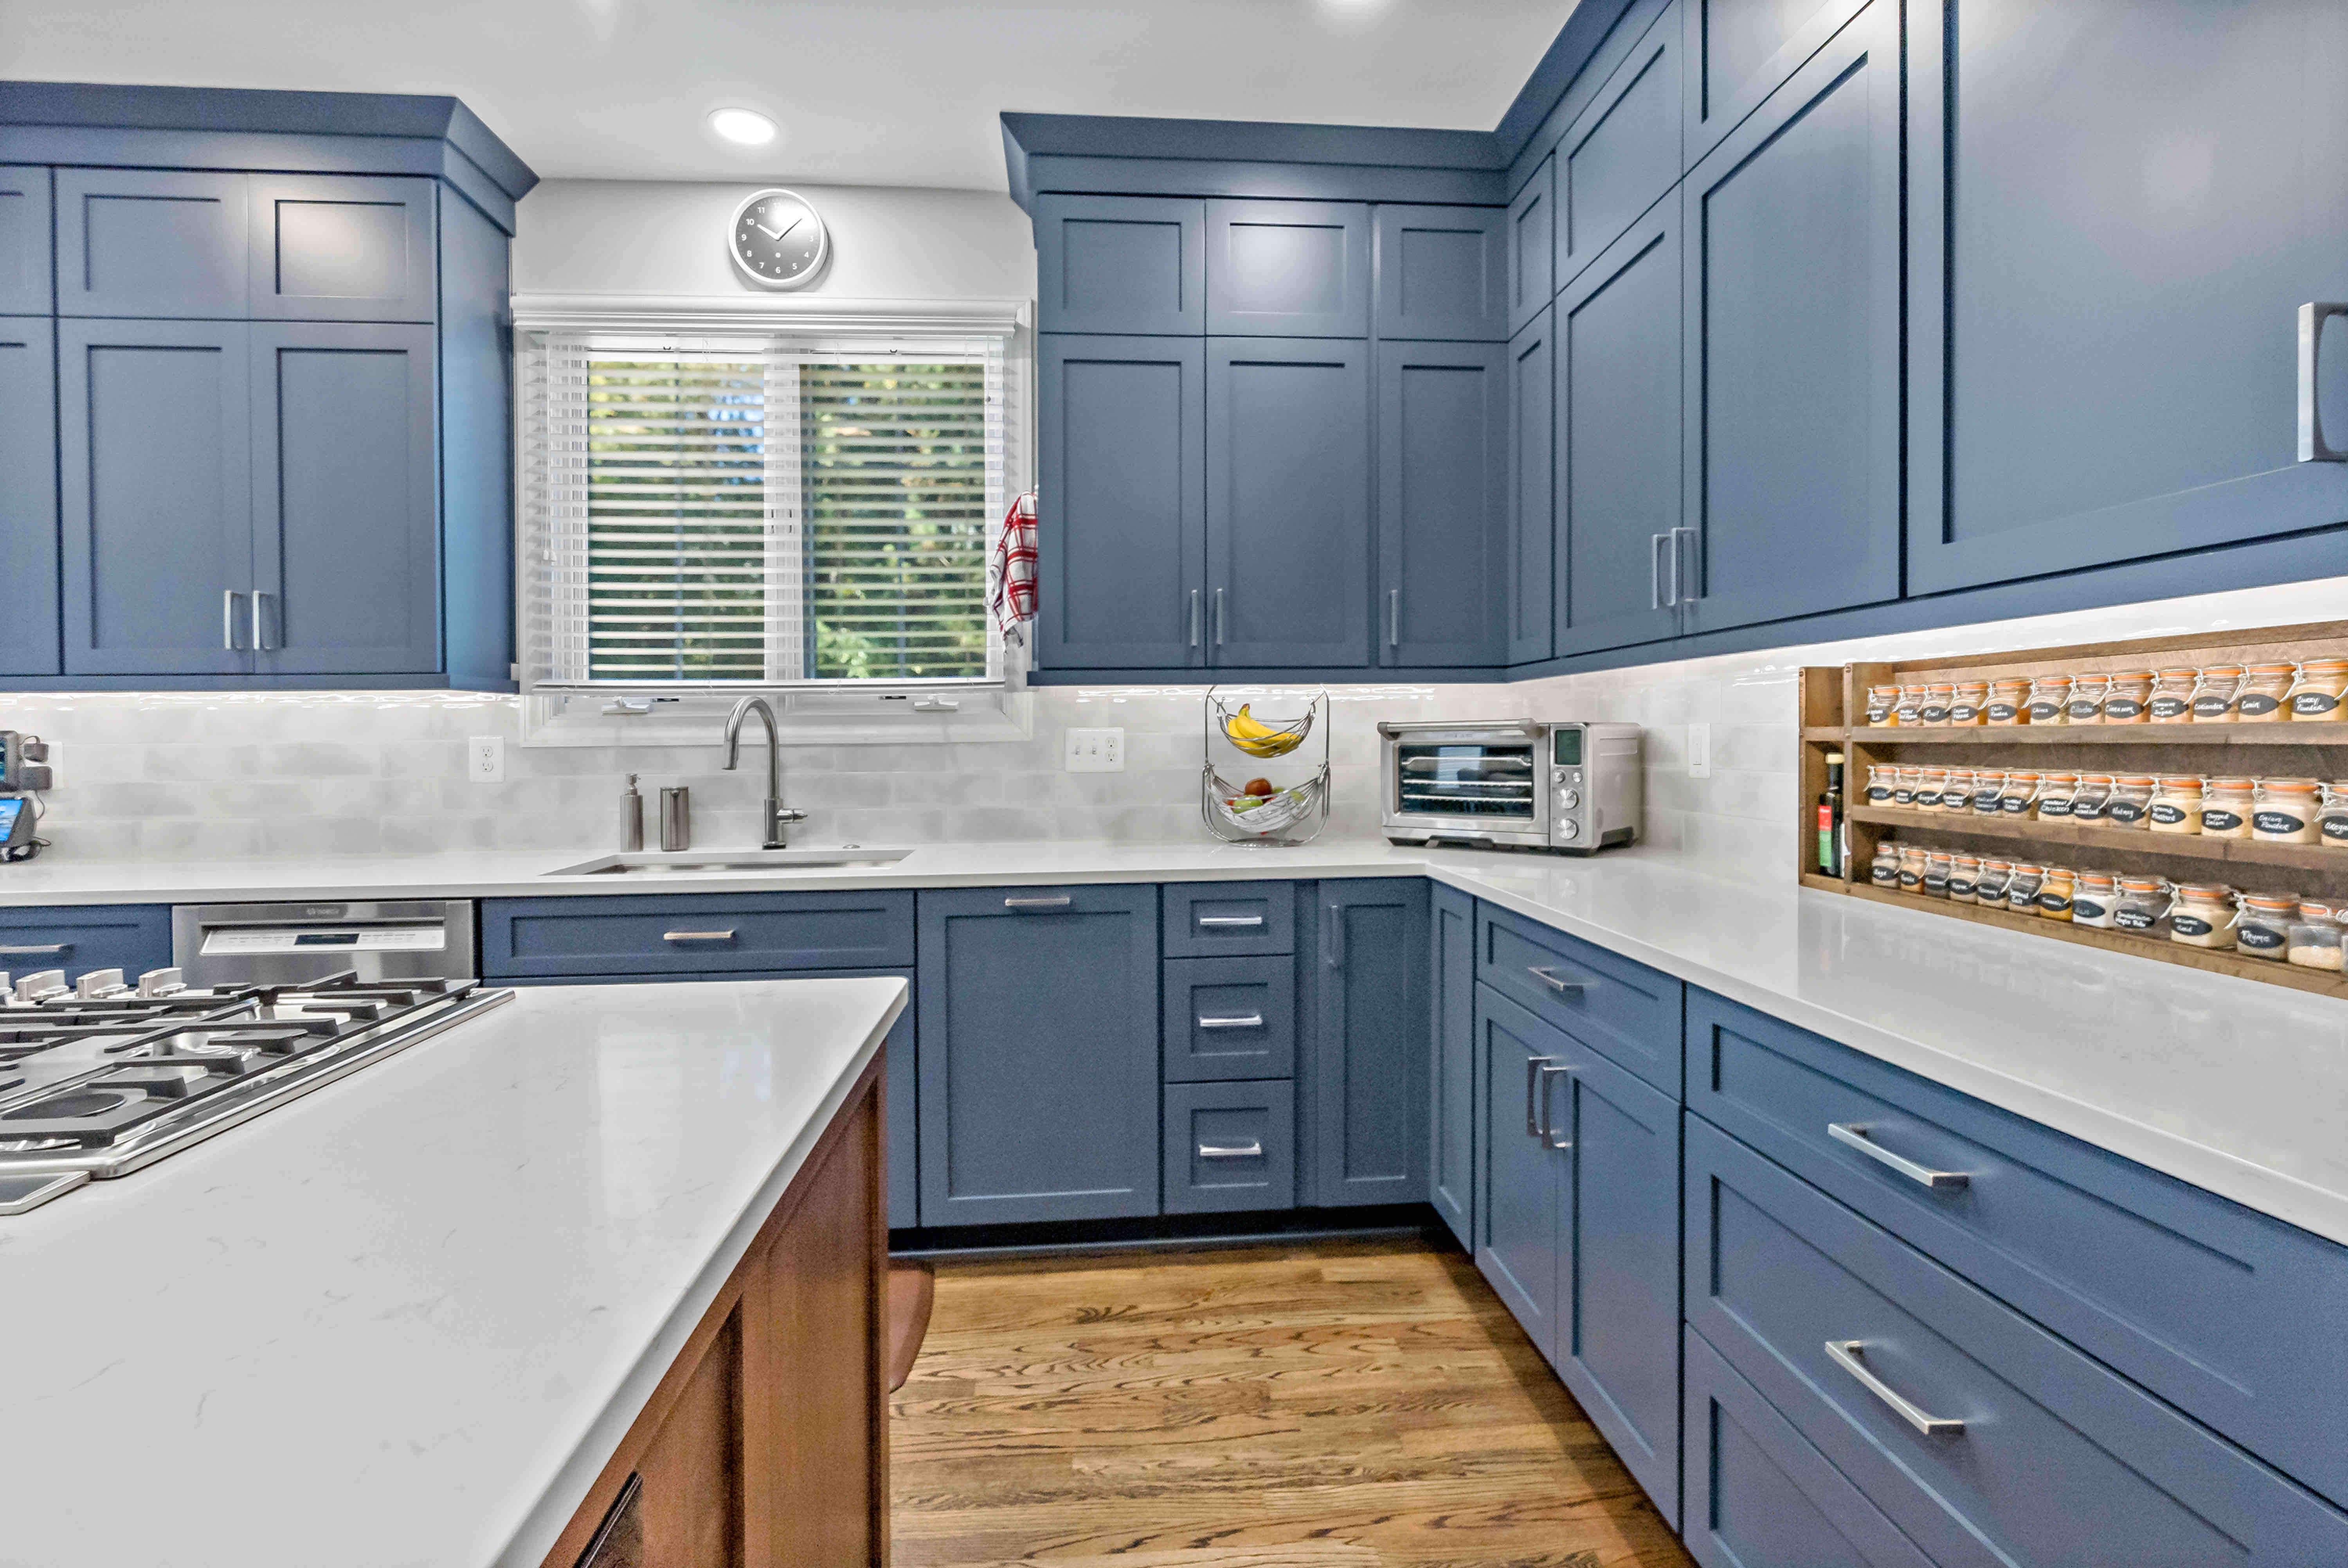 White backsplash and countertops with blue cabinetry in kitchen